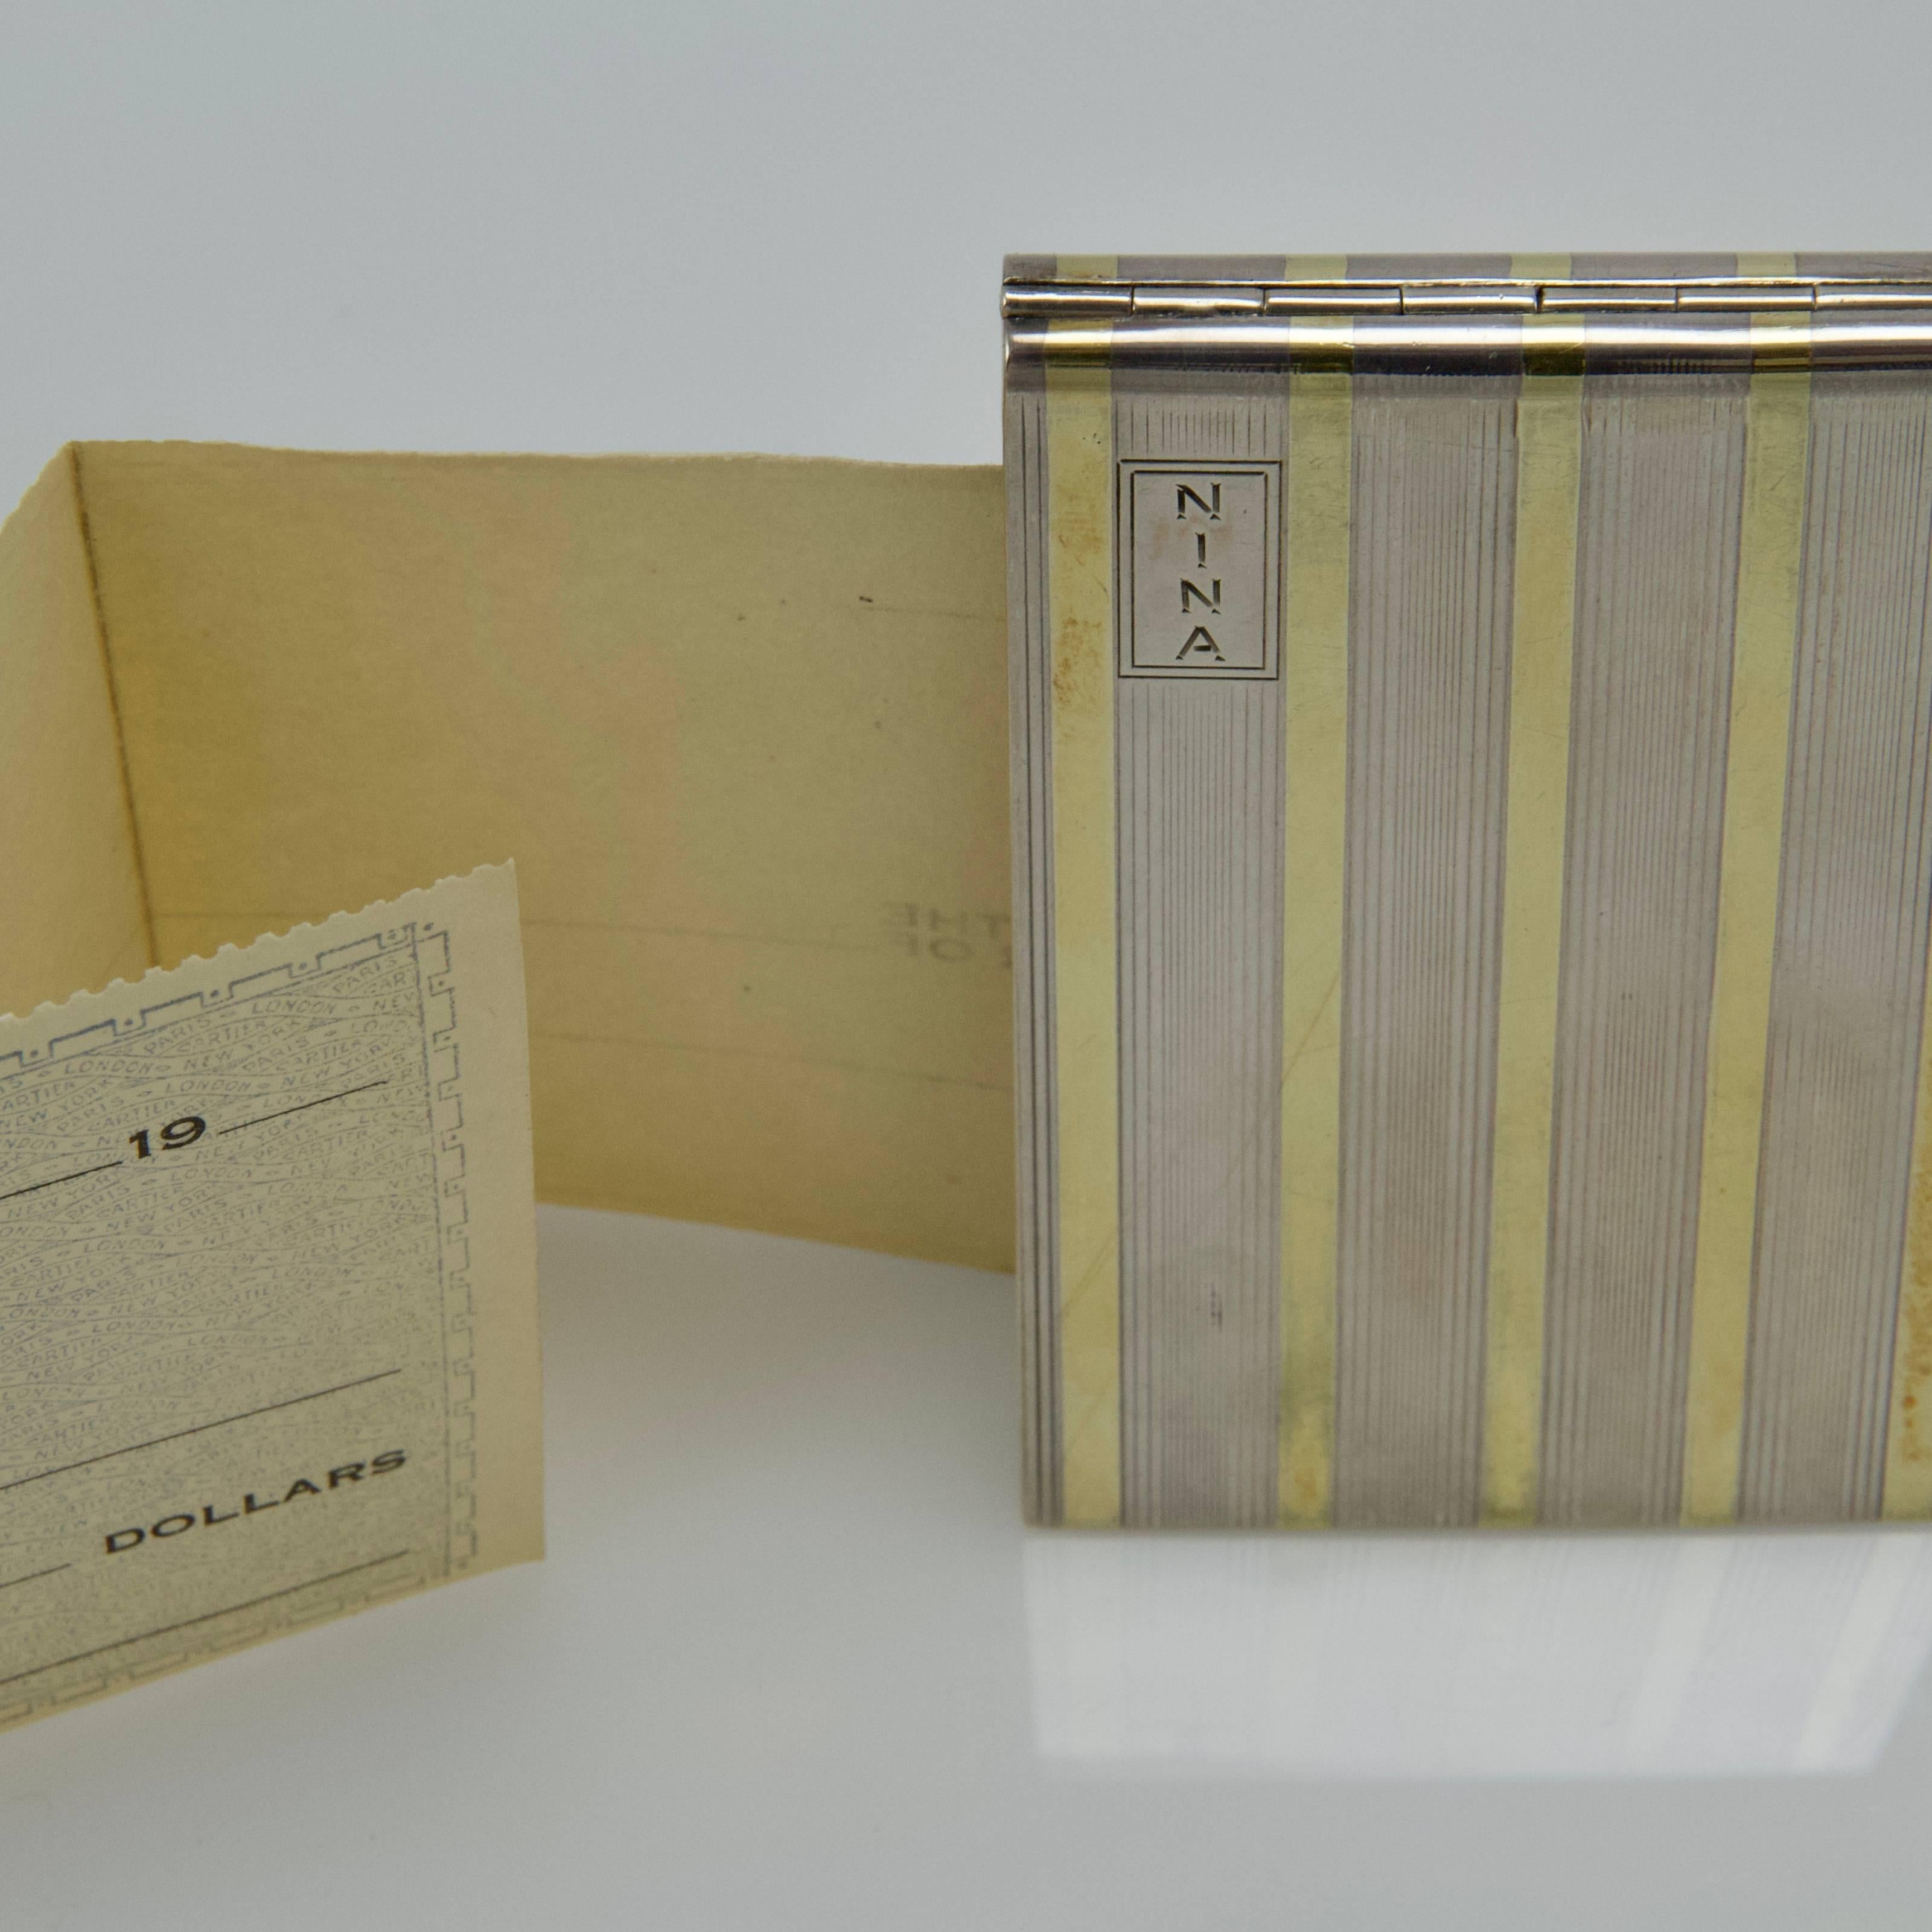 Art Deco 20th Century Gold and Silver Check Cases by Cartier, 1917 For Sale